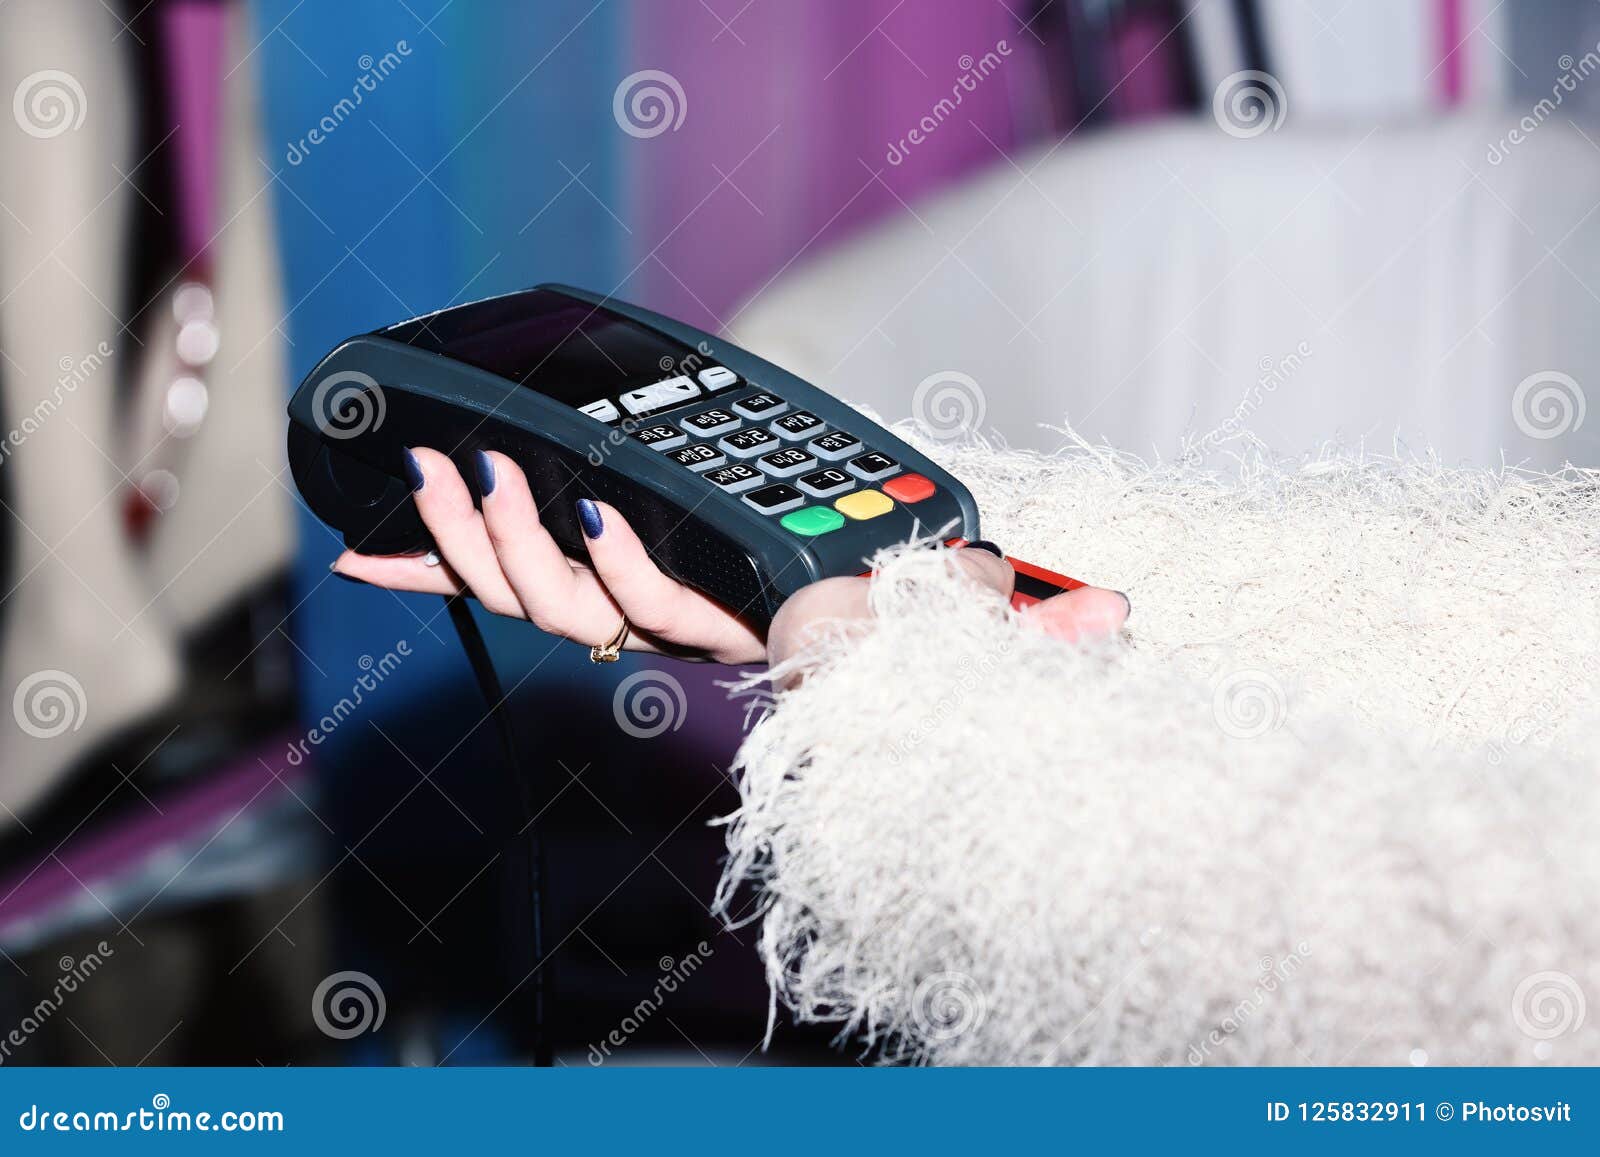 female hand puts bankcard into reader on defocused background. payment with credit card. edc machine or credit card